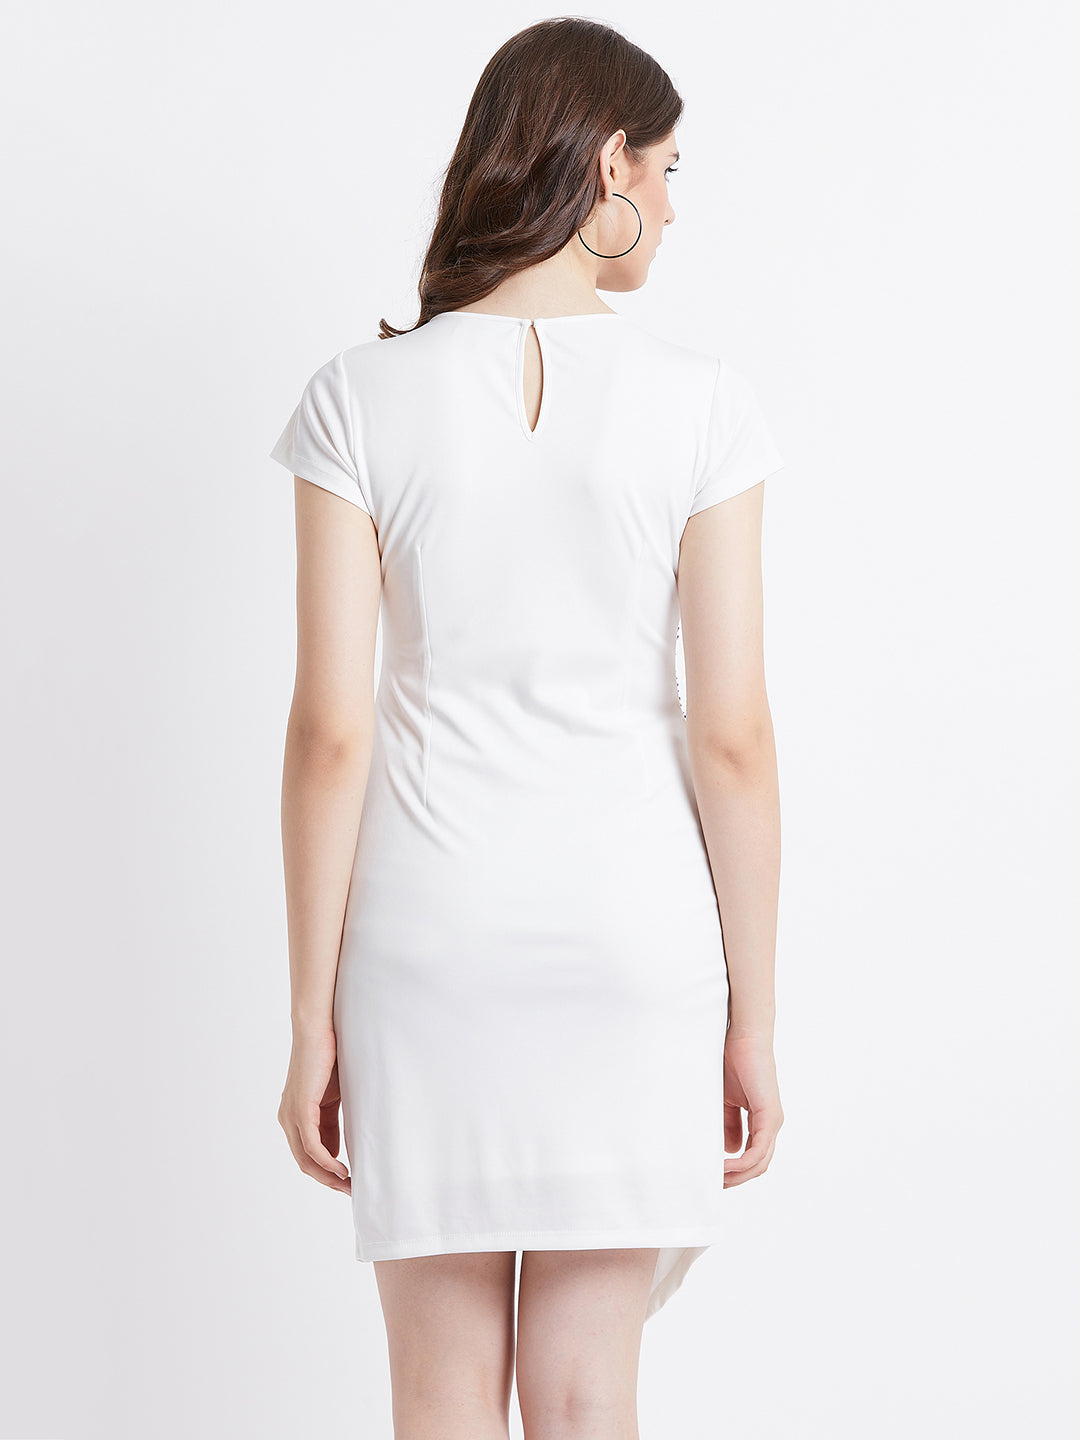 LY2 Polyester white Round Neck Short A-Line Party Dress For Women